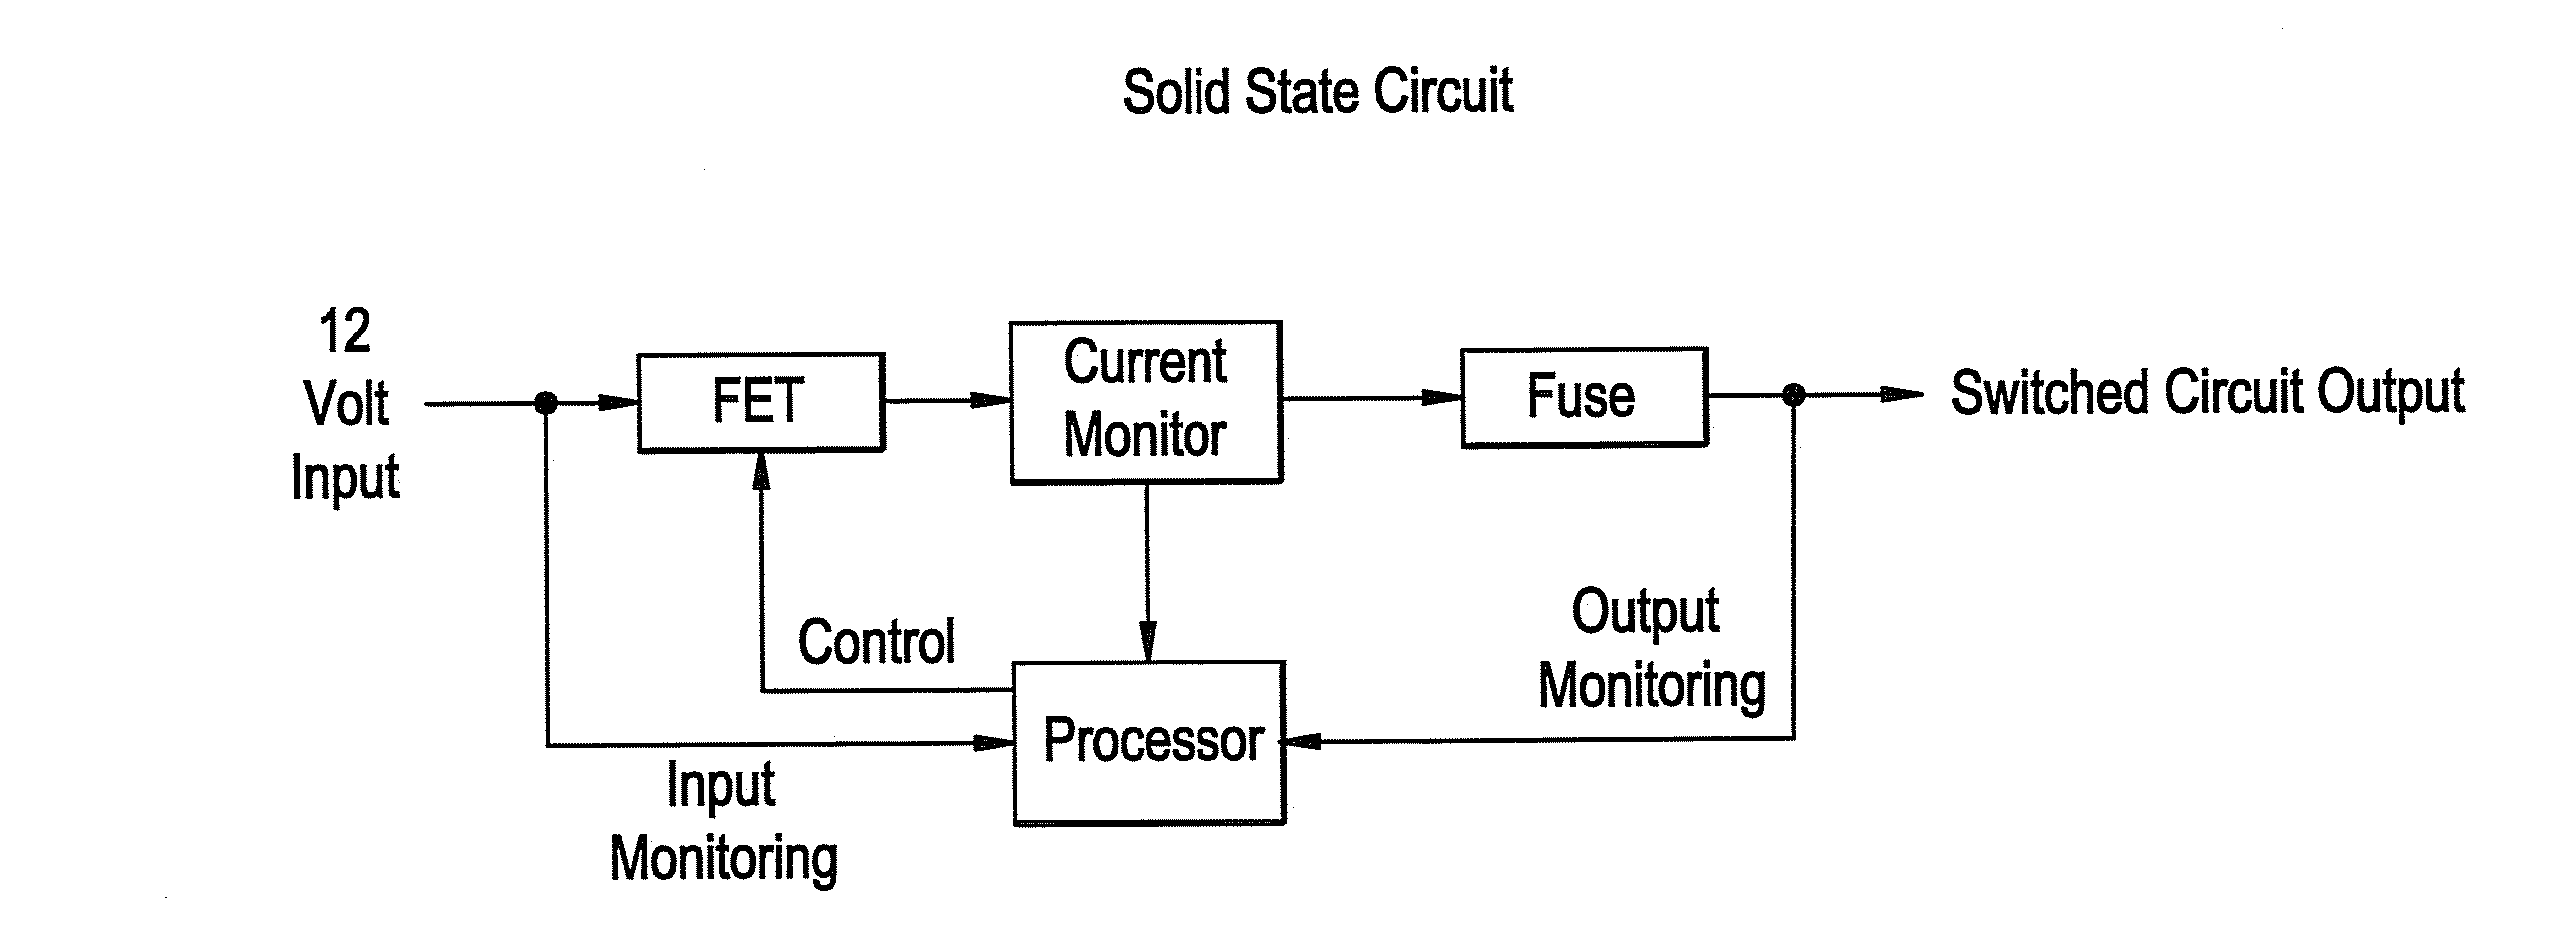 Remote power management and monitoring system for solid state circuit breaker control with manual bypass